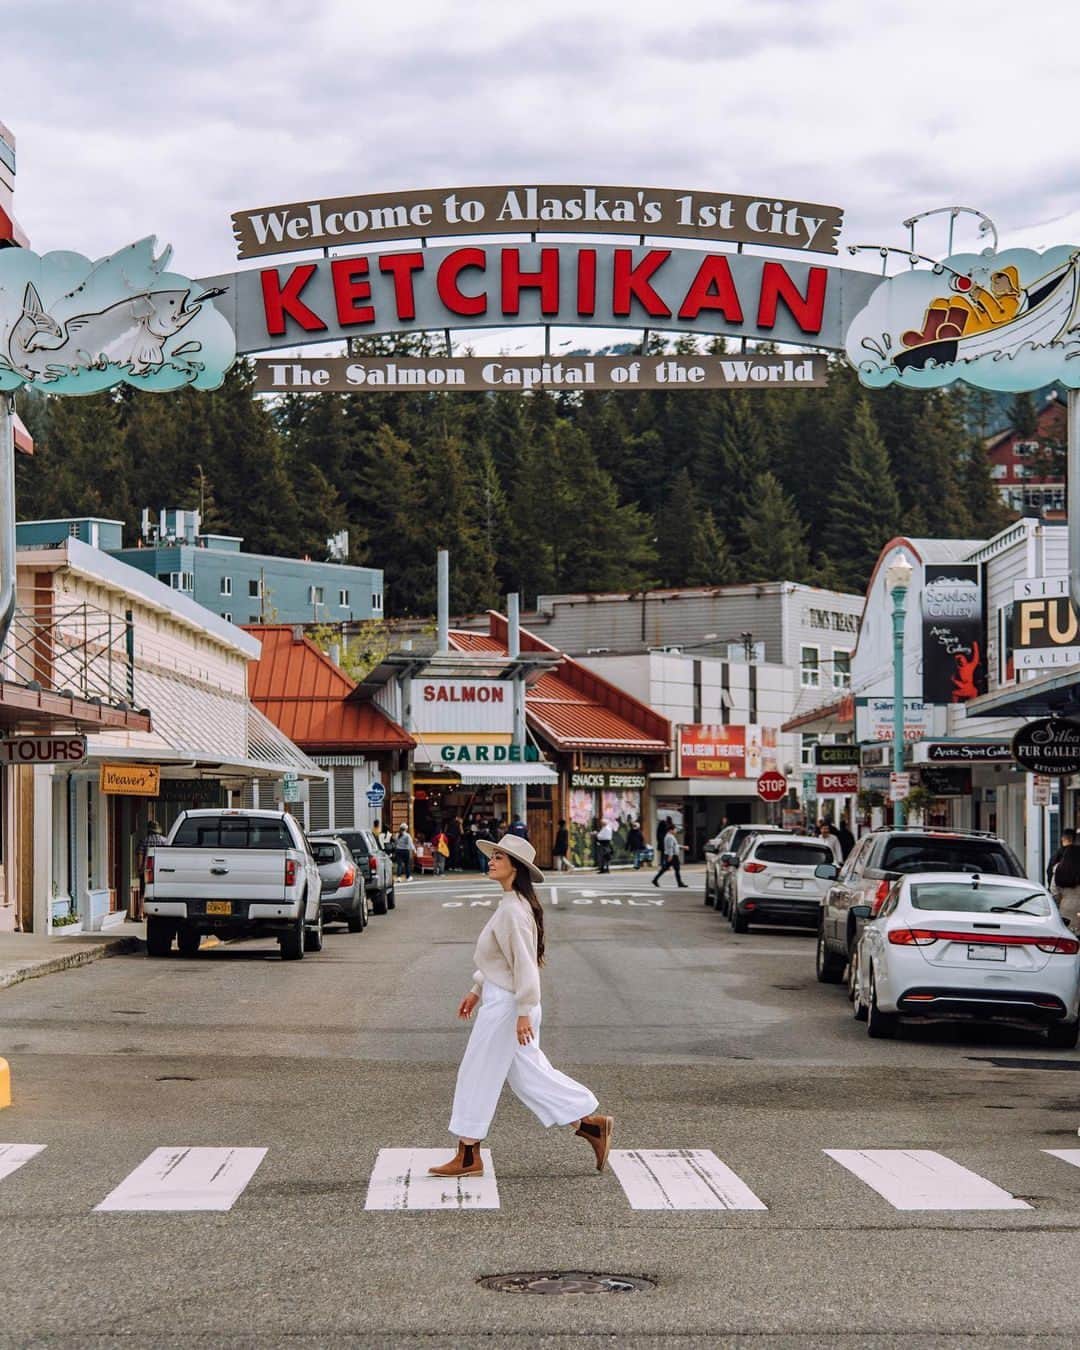 Visit The USAのインスタグラム：「An epic, remote, and idyllic escape in the USA? Keep scrolling and reading (and daydreaming!) for a life-changing trip to Ketchikan, Alaska. 🤩  Keep these recommendations on the top of your to-do list to experience the most amazing vacation:  🚶 Wander amid the totems at Totem Bight State Historical Park 🚁 See the Misty Fjords National Monument from above on a flightseeing tour  🛍️ Explore the shops, restaurants and museums in historic Creek Street 🎣 Go salmon fishing in Tongass National Forest 🥾 Hike to the top of Deer Mountain 🪓 See the mindblowing Great Alaskan Lumberjack Show  ⛴️To get here, fly into Ketchikan International Airport and take a short ferry ride to Ketchikan 📅Plan your trip for spring or summer for the best weather  📸: @jasminealley  #VisitTheUSA #TravelAlaska #AlaskaPhotography #GoExplore #AdventureTime」